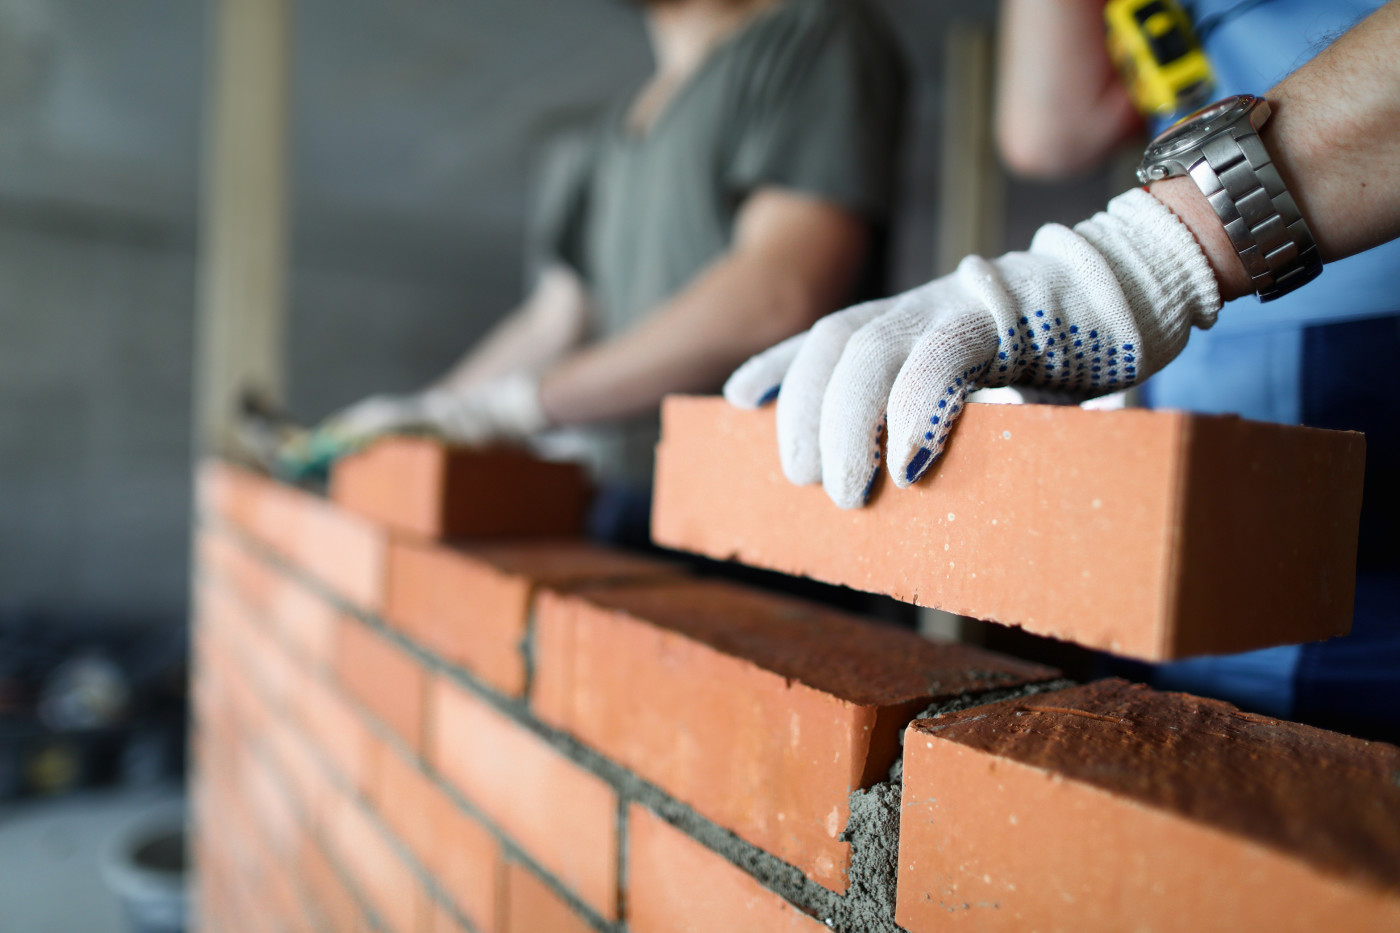 A brick wall being laid. The image shows a worker's hand in the foreground holding a brick above the in-progress wall.